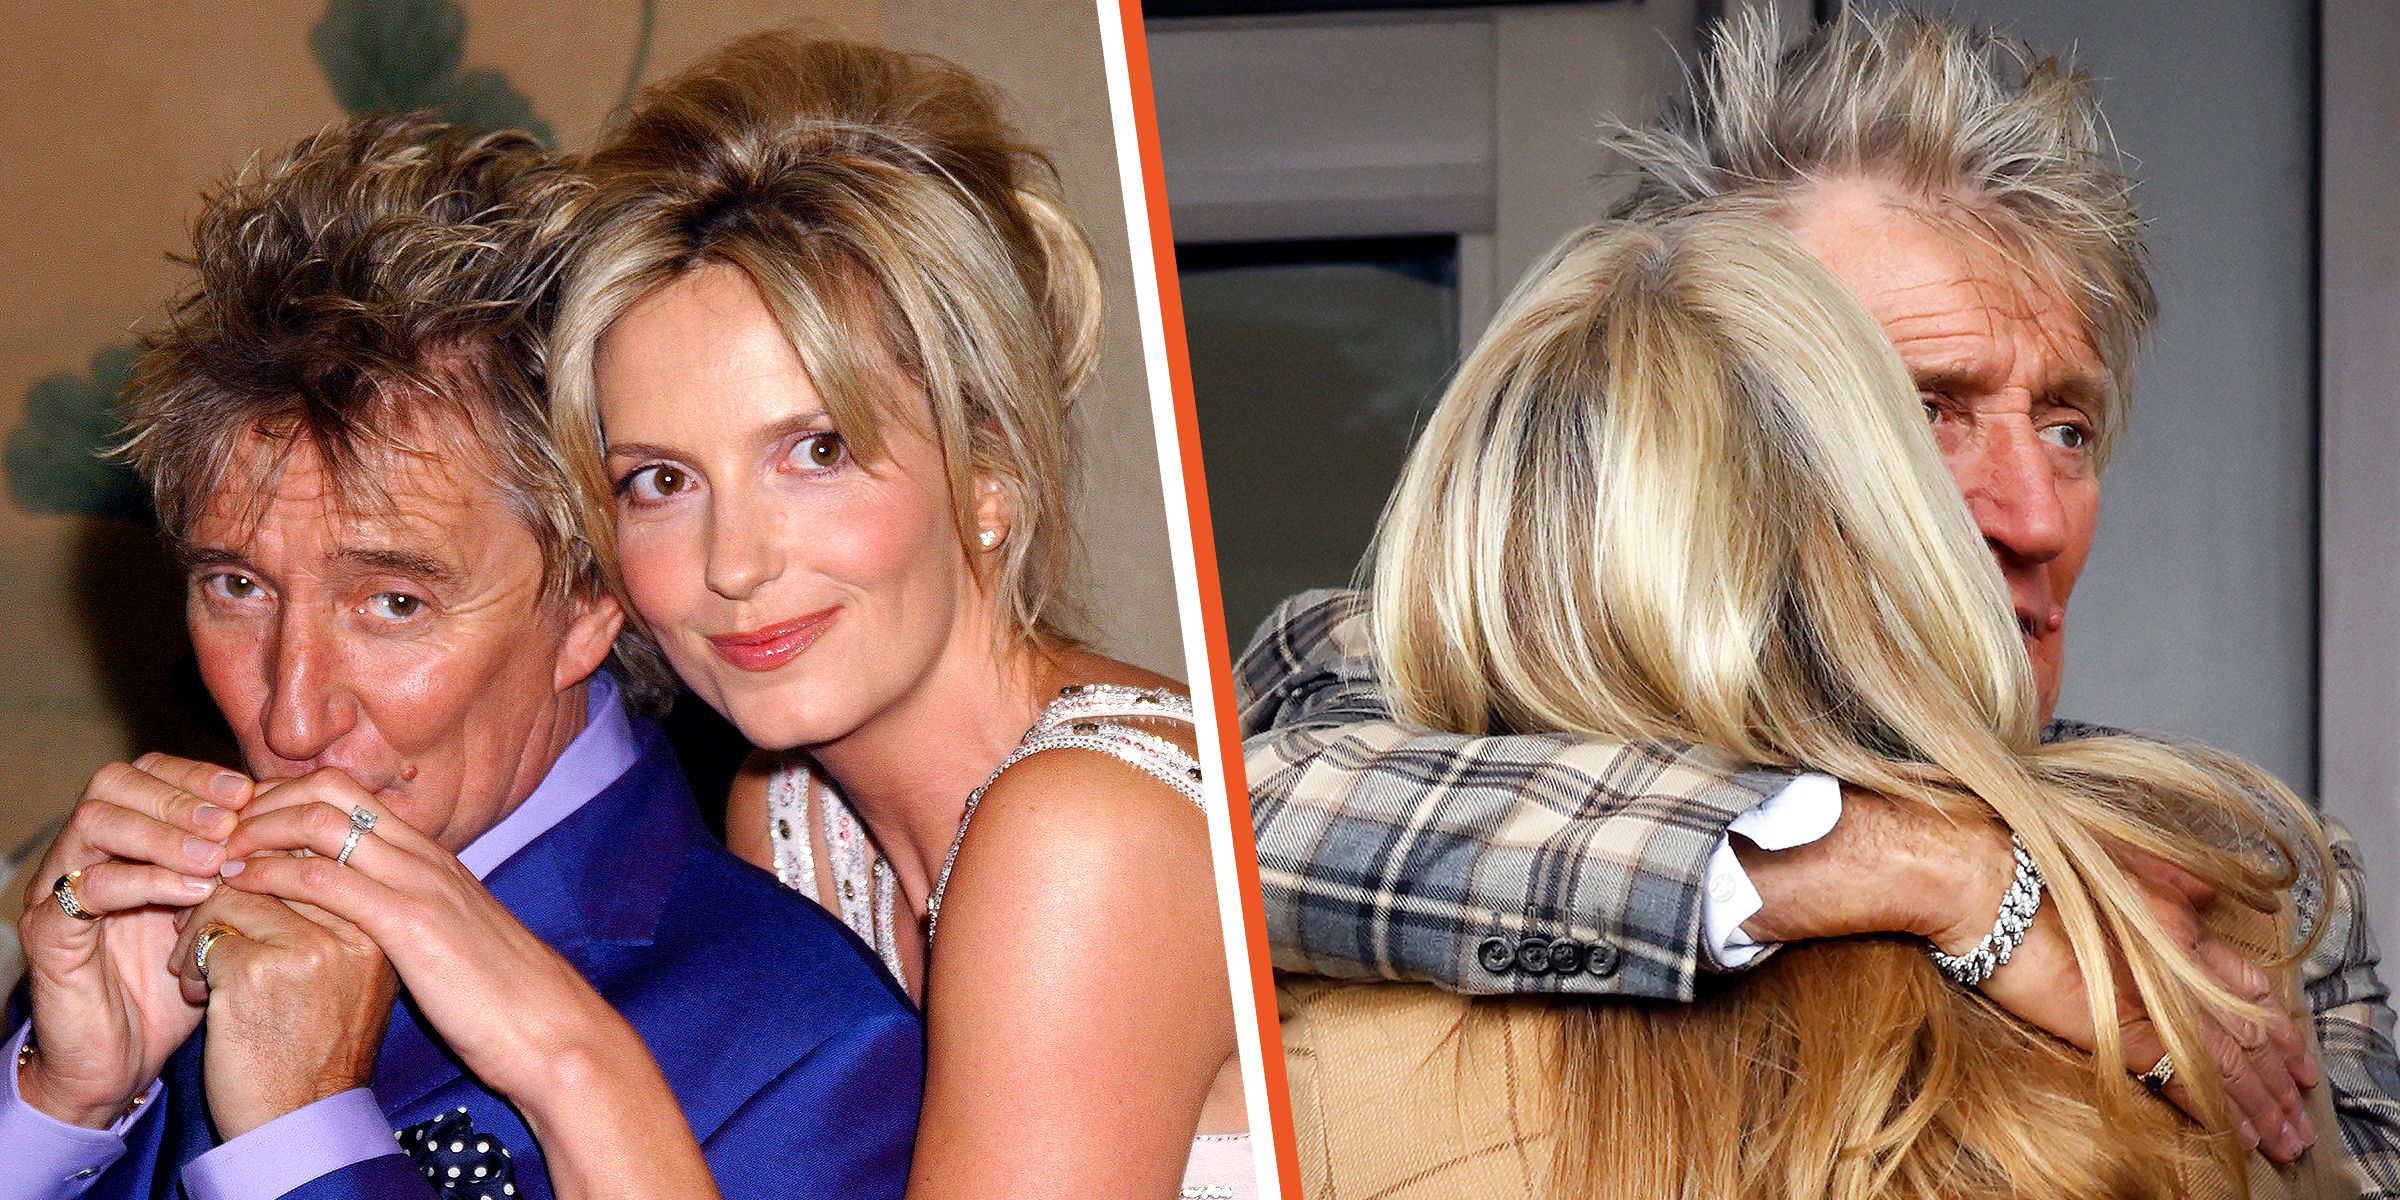 Rod Stewart and Penny Lancaster | Source: Getty Images